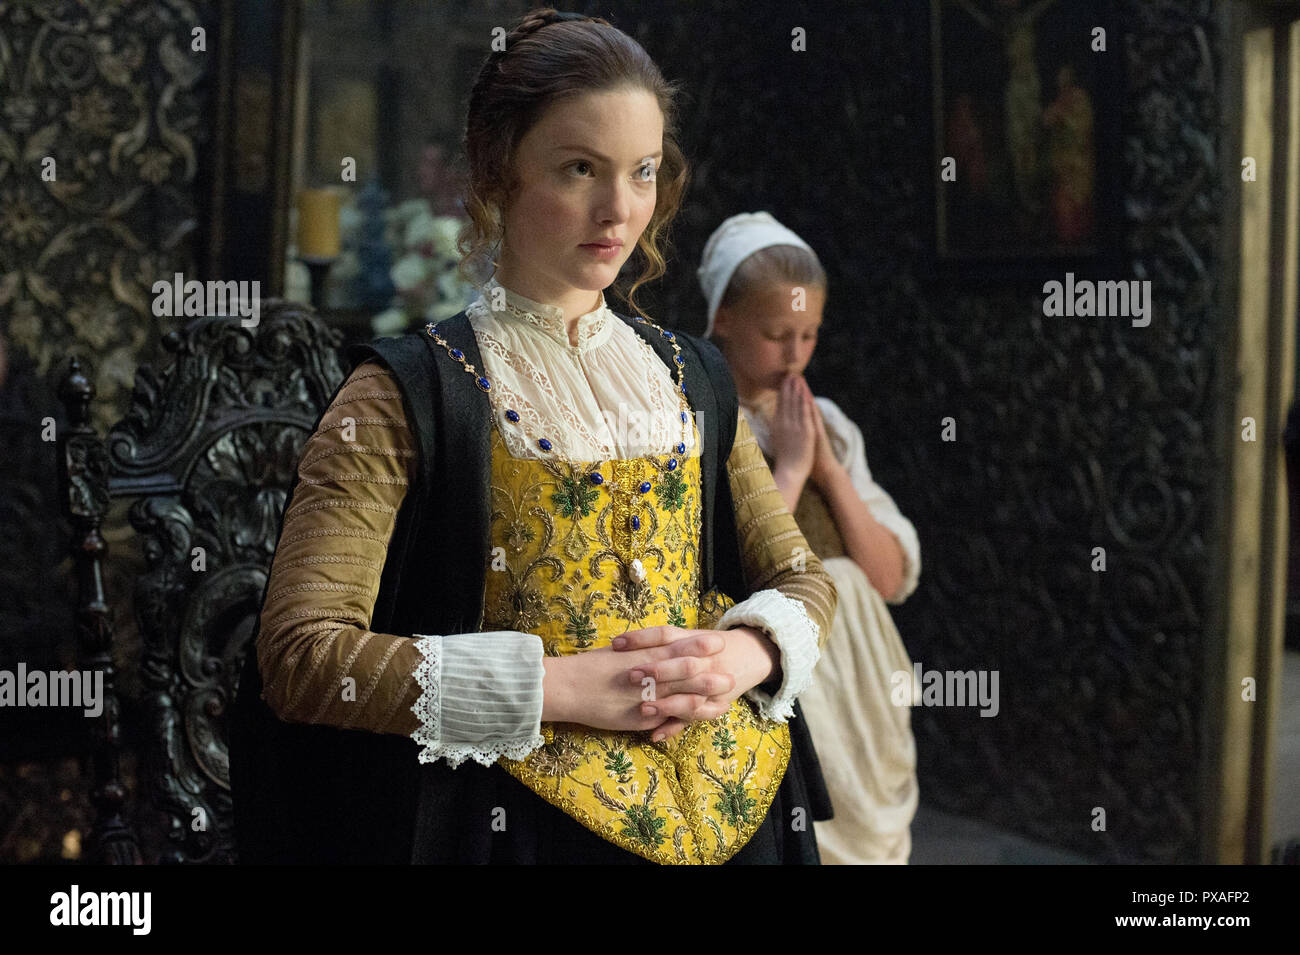 RELEASE DATE: September 1, 2017 TITLE: Tulip Fever STUDIO: Weinstein Company DIRECTOR: Justin Chadwick PLOT: An artist falls for a young married woman while he's commissioned to paint her portrait during the Tulip mania of 17th century Amsterdam STARRING: Judi Dench, Alicia Vikander, Dane DeHaan, Jack O'Connell. (Credit: © Weinstein Company/Entertainment Pictures) Stock Photo